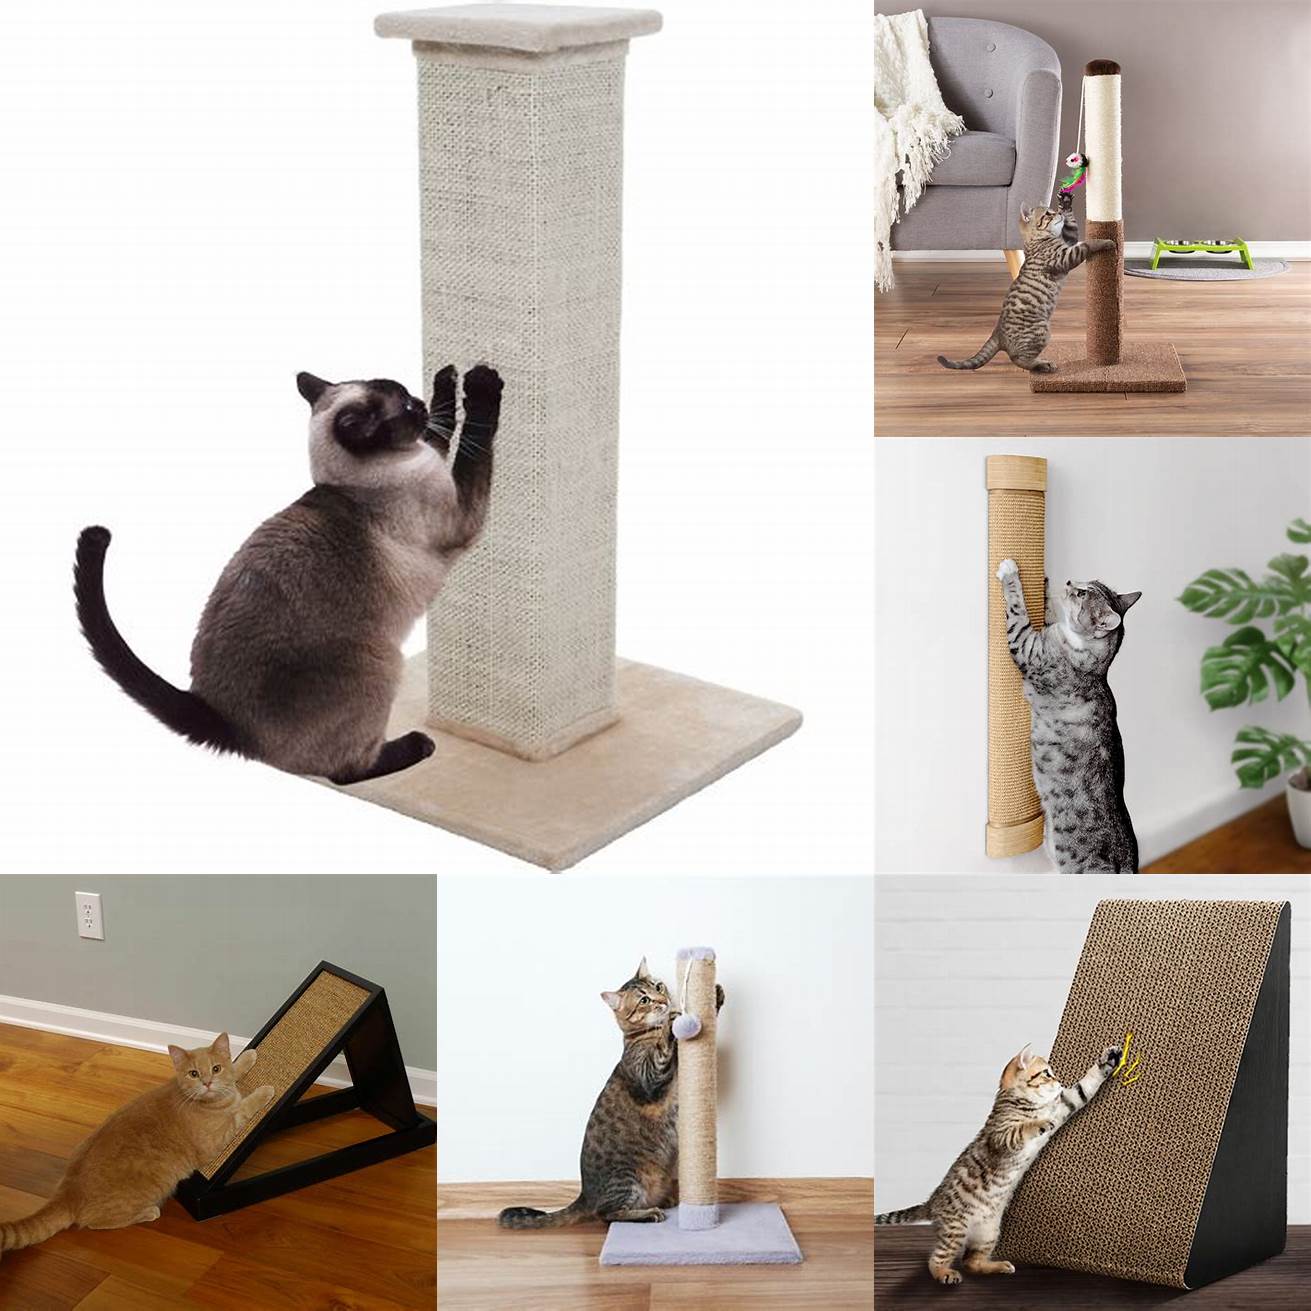 Consider using a scratch post or pad to redirect your cats scratching behavior